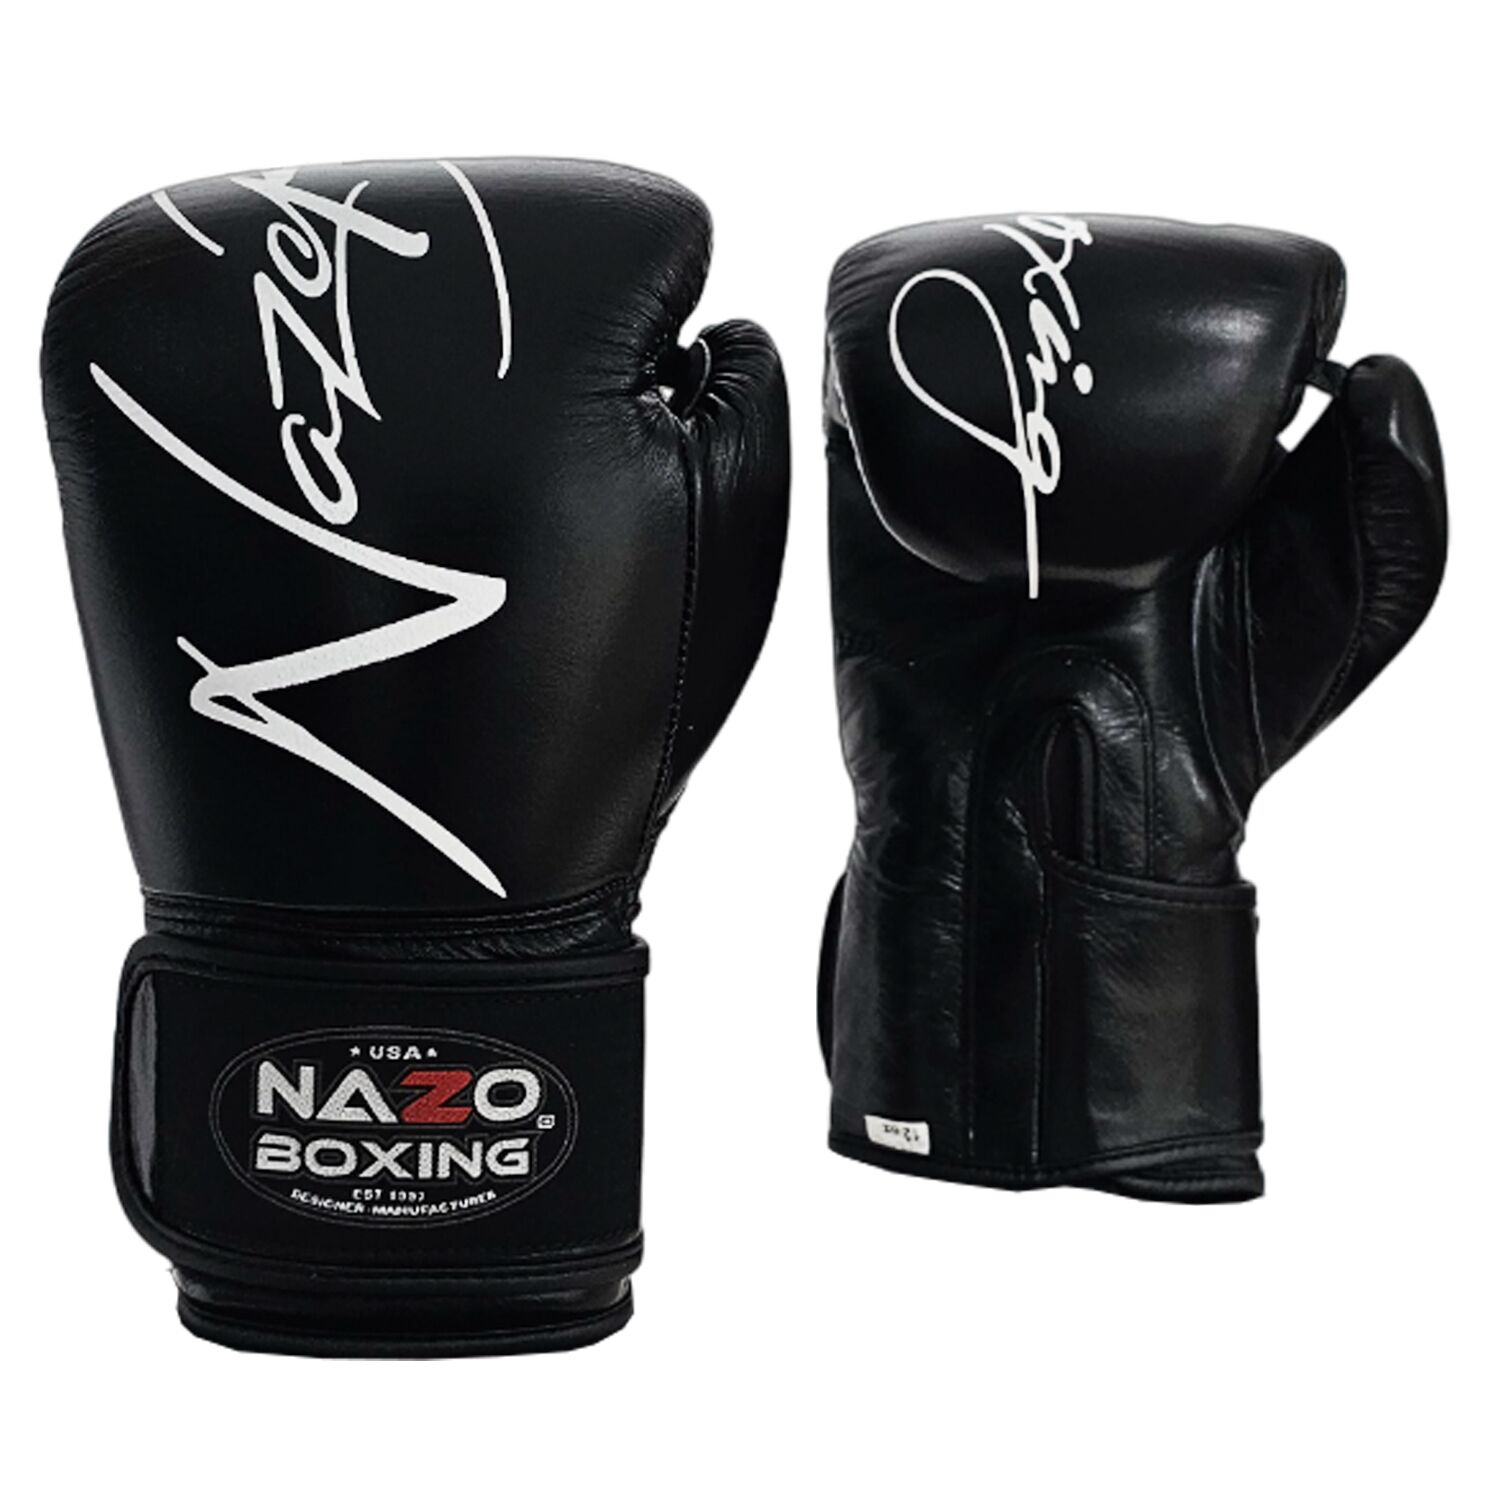 Leather Boxing Training Gloves Black & White by Nazo Boxing